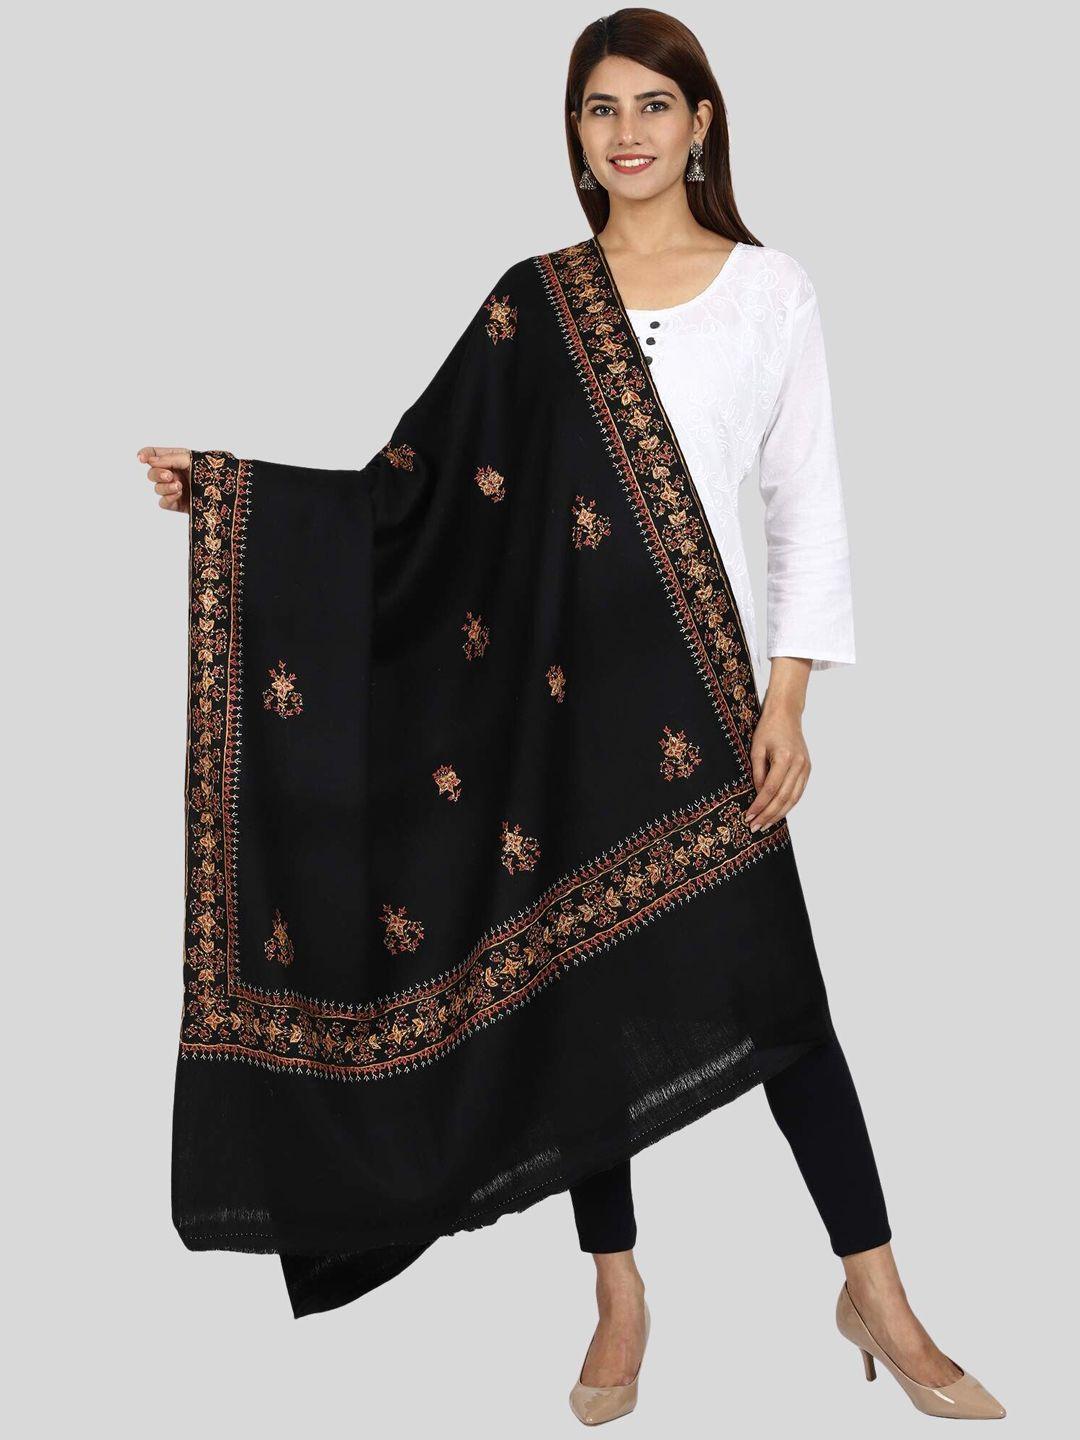 swi stylish floral embroidered pure wool shawl